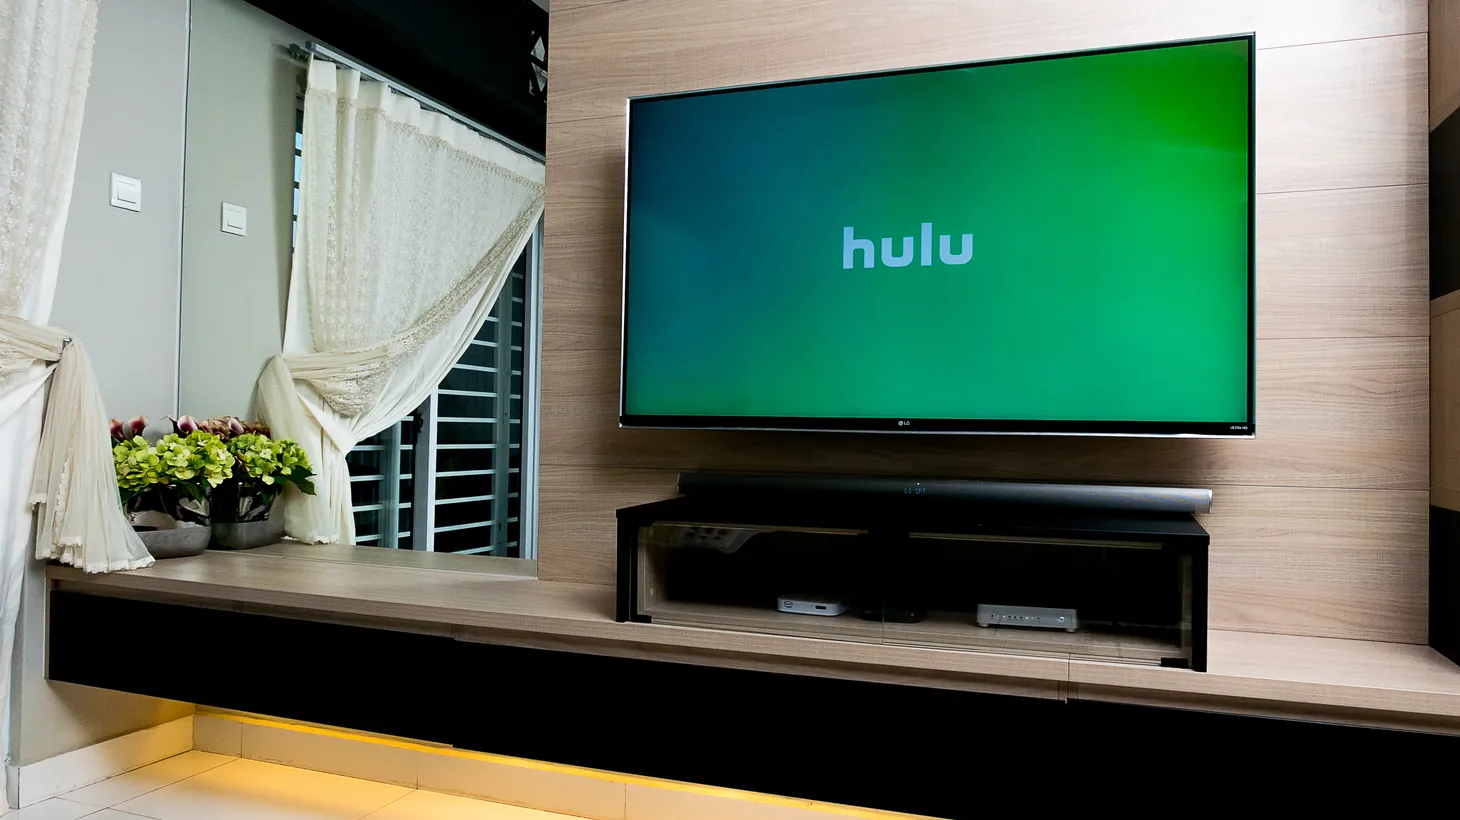 “[Hulu has] more than 40 million subscribers. So will those subscribers come over to Disney+ if Hulu was folded in? Perhaps. Perhaps not,” remarks Matt Belloni, founding partner of Puck News.